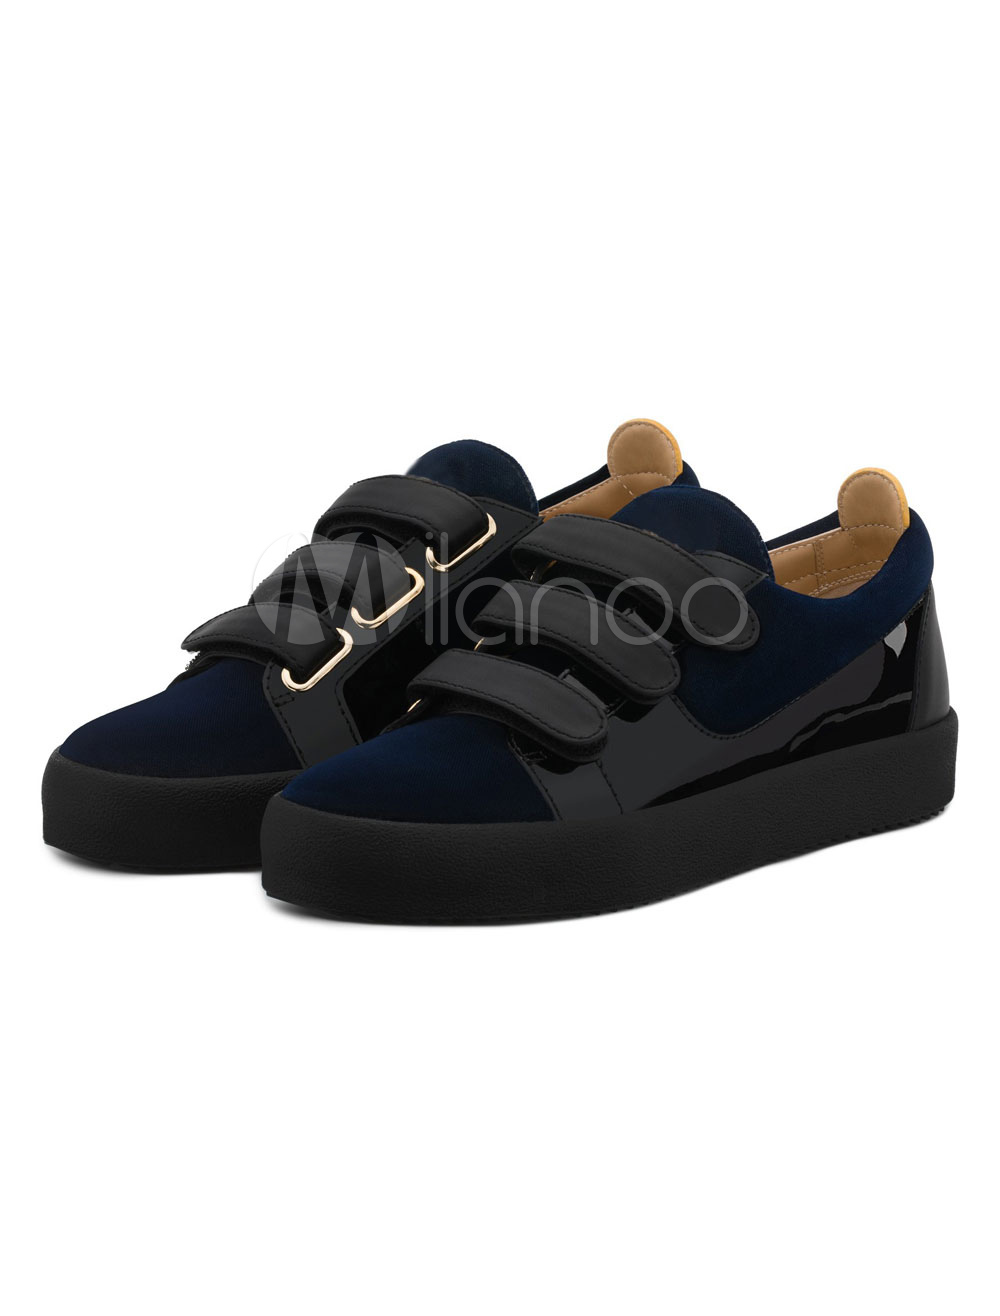 Men Skate Shoes Suede Round To 